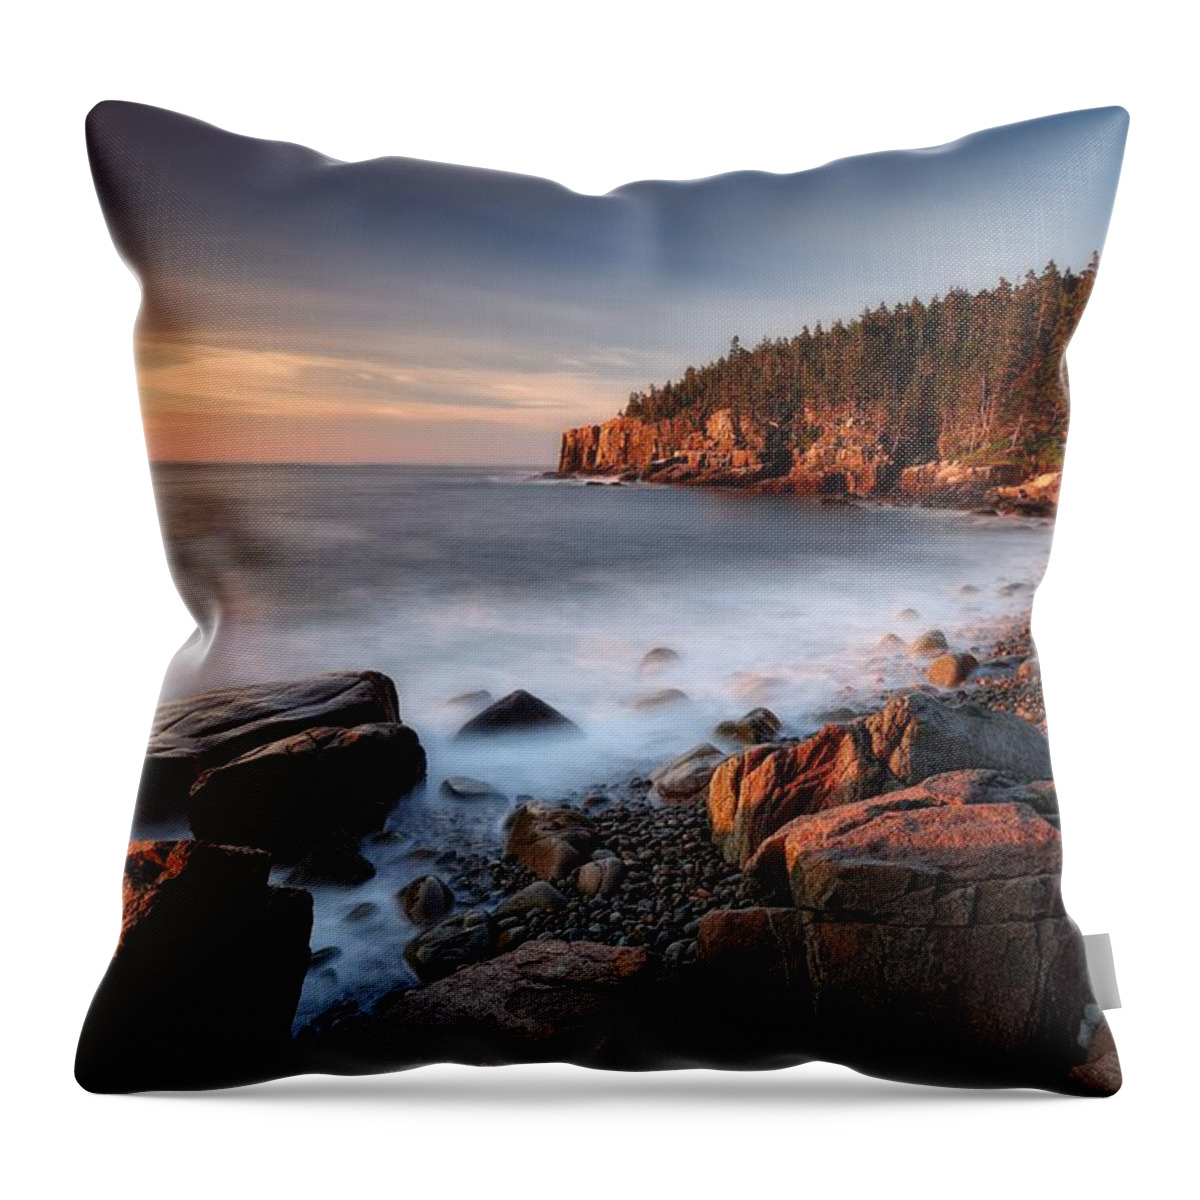 Acadia Throw Pillow featuring the photograph Acadia Otter Cliffs by Daniel Behm